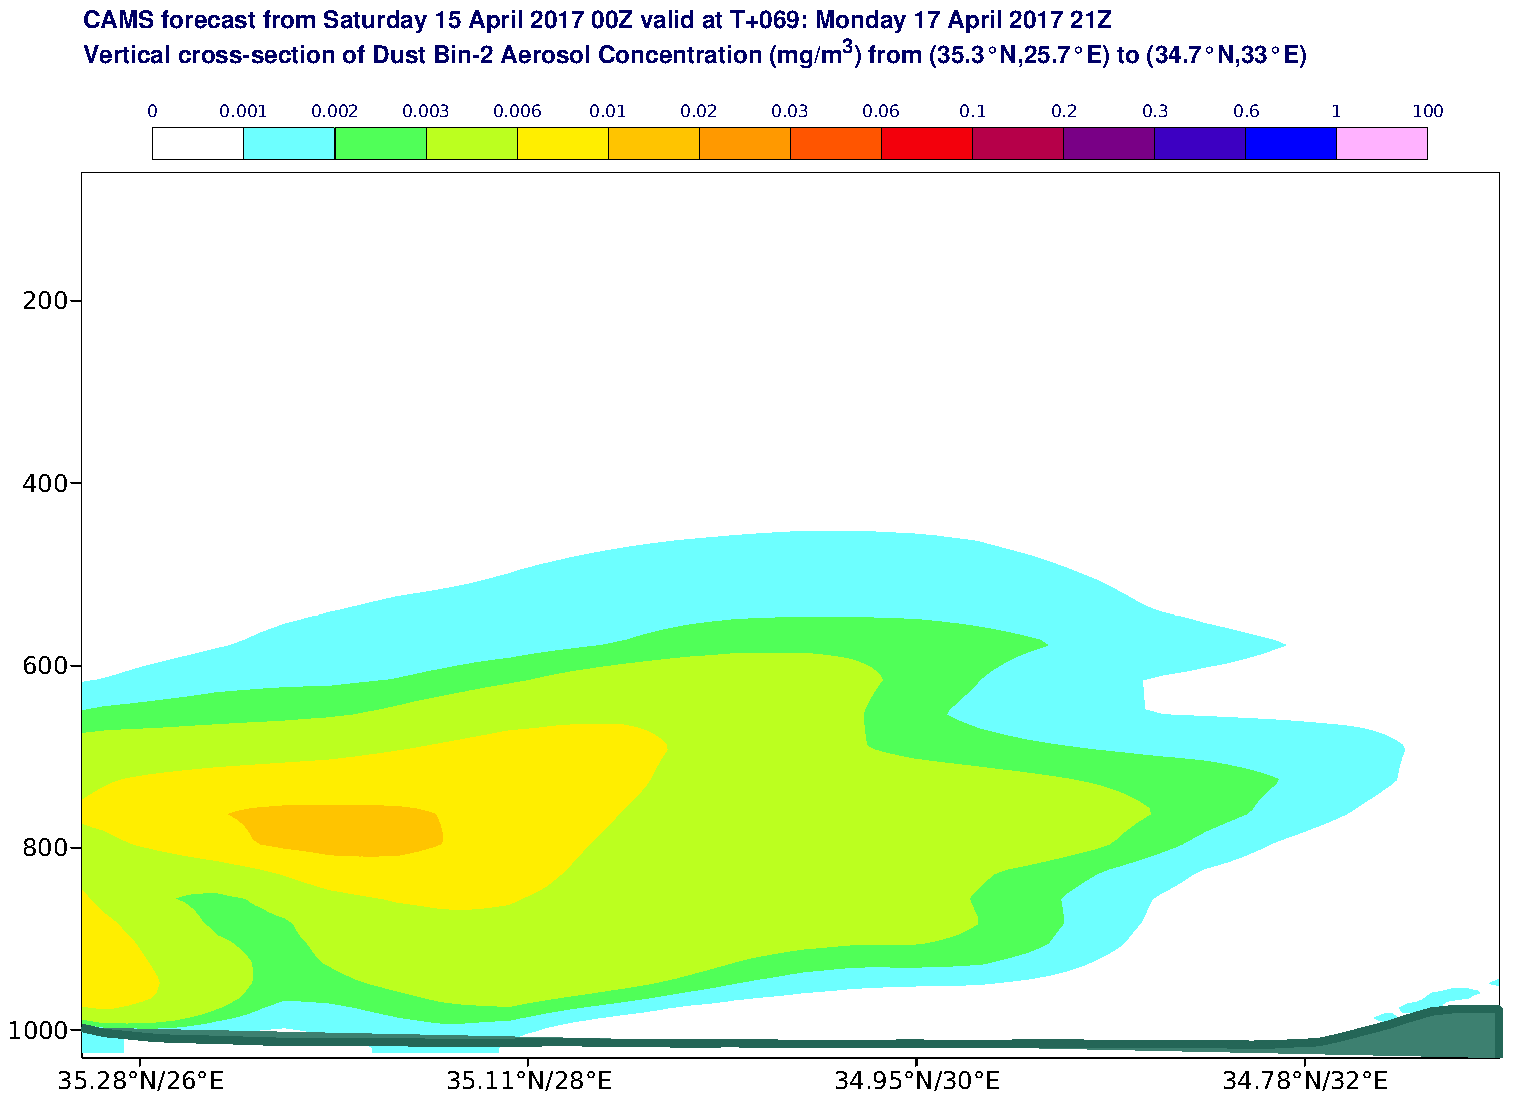 Vertical cross-section of Dust Bin-2 Aerosol Concentration (mg/m3) valid at T69 - 2017-04-17 21:00